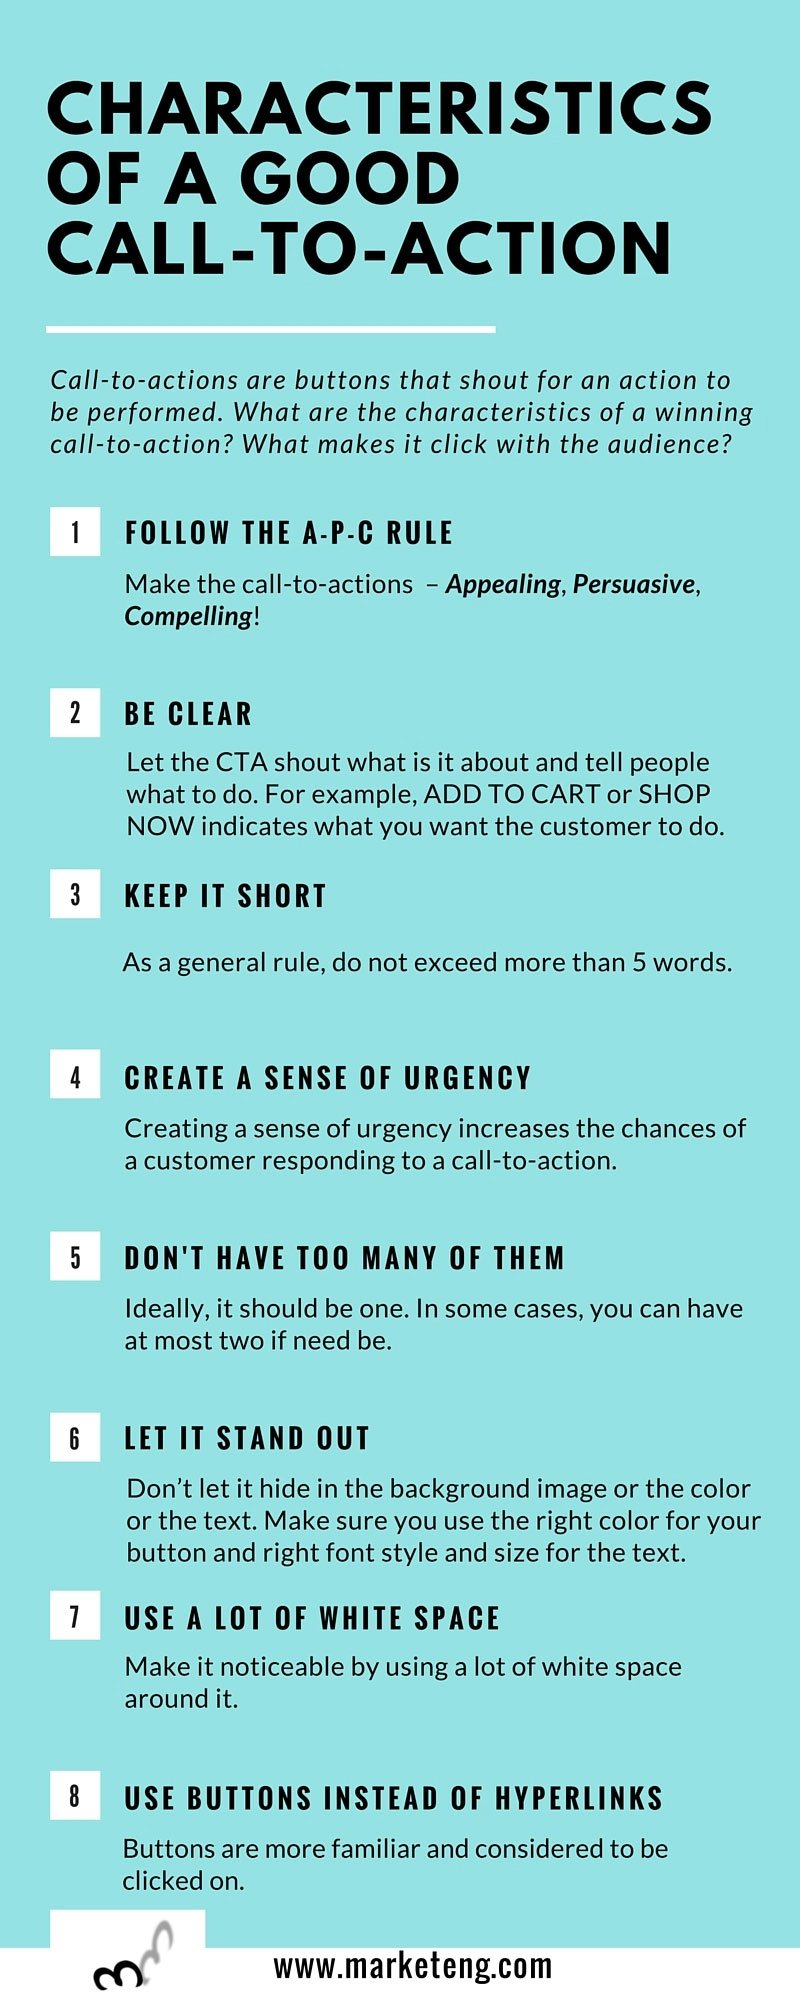 V Digital Services - How to Get More Website Traffic Without Paid Media: Characteristics of a Good CTA Infographic